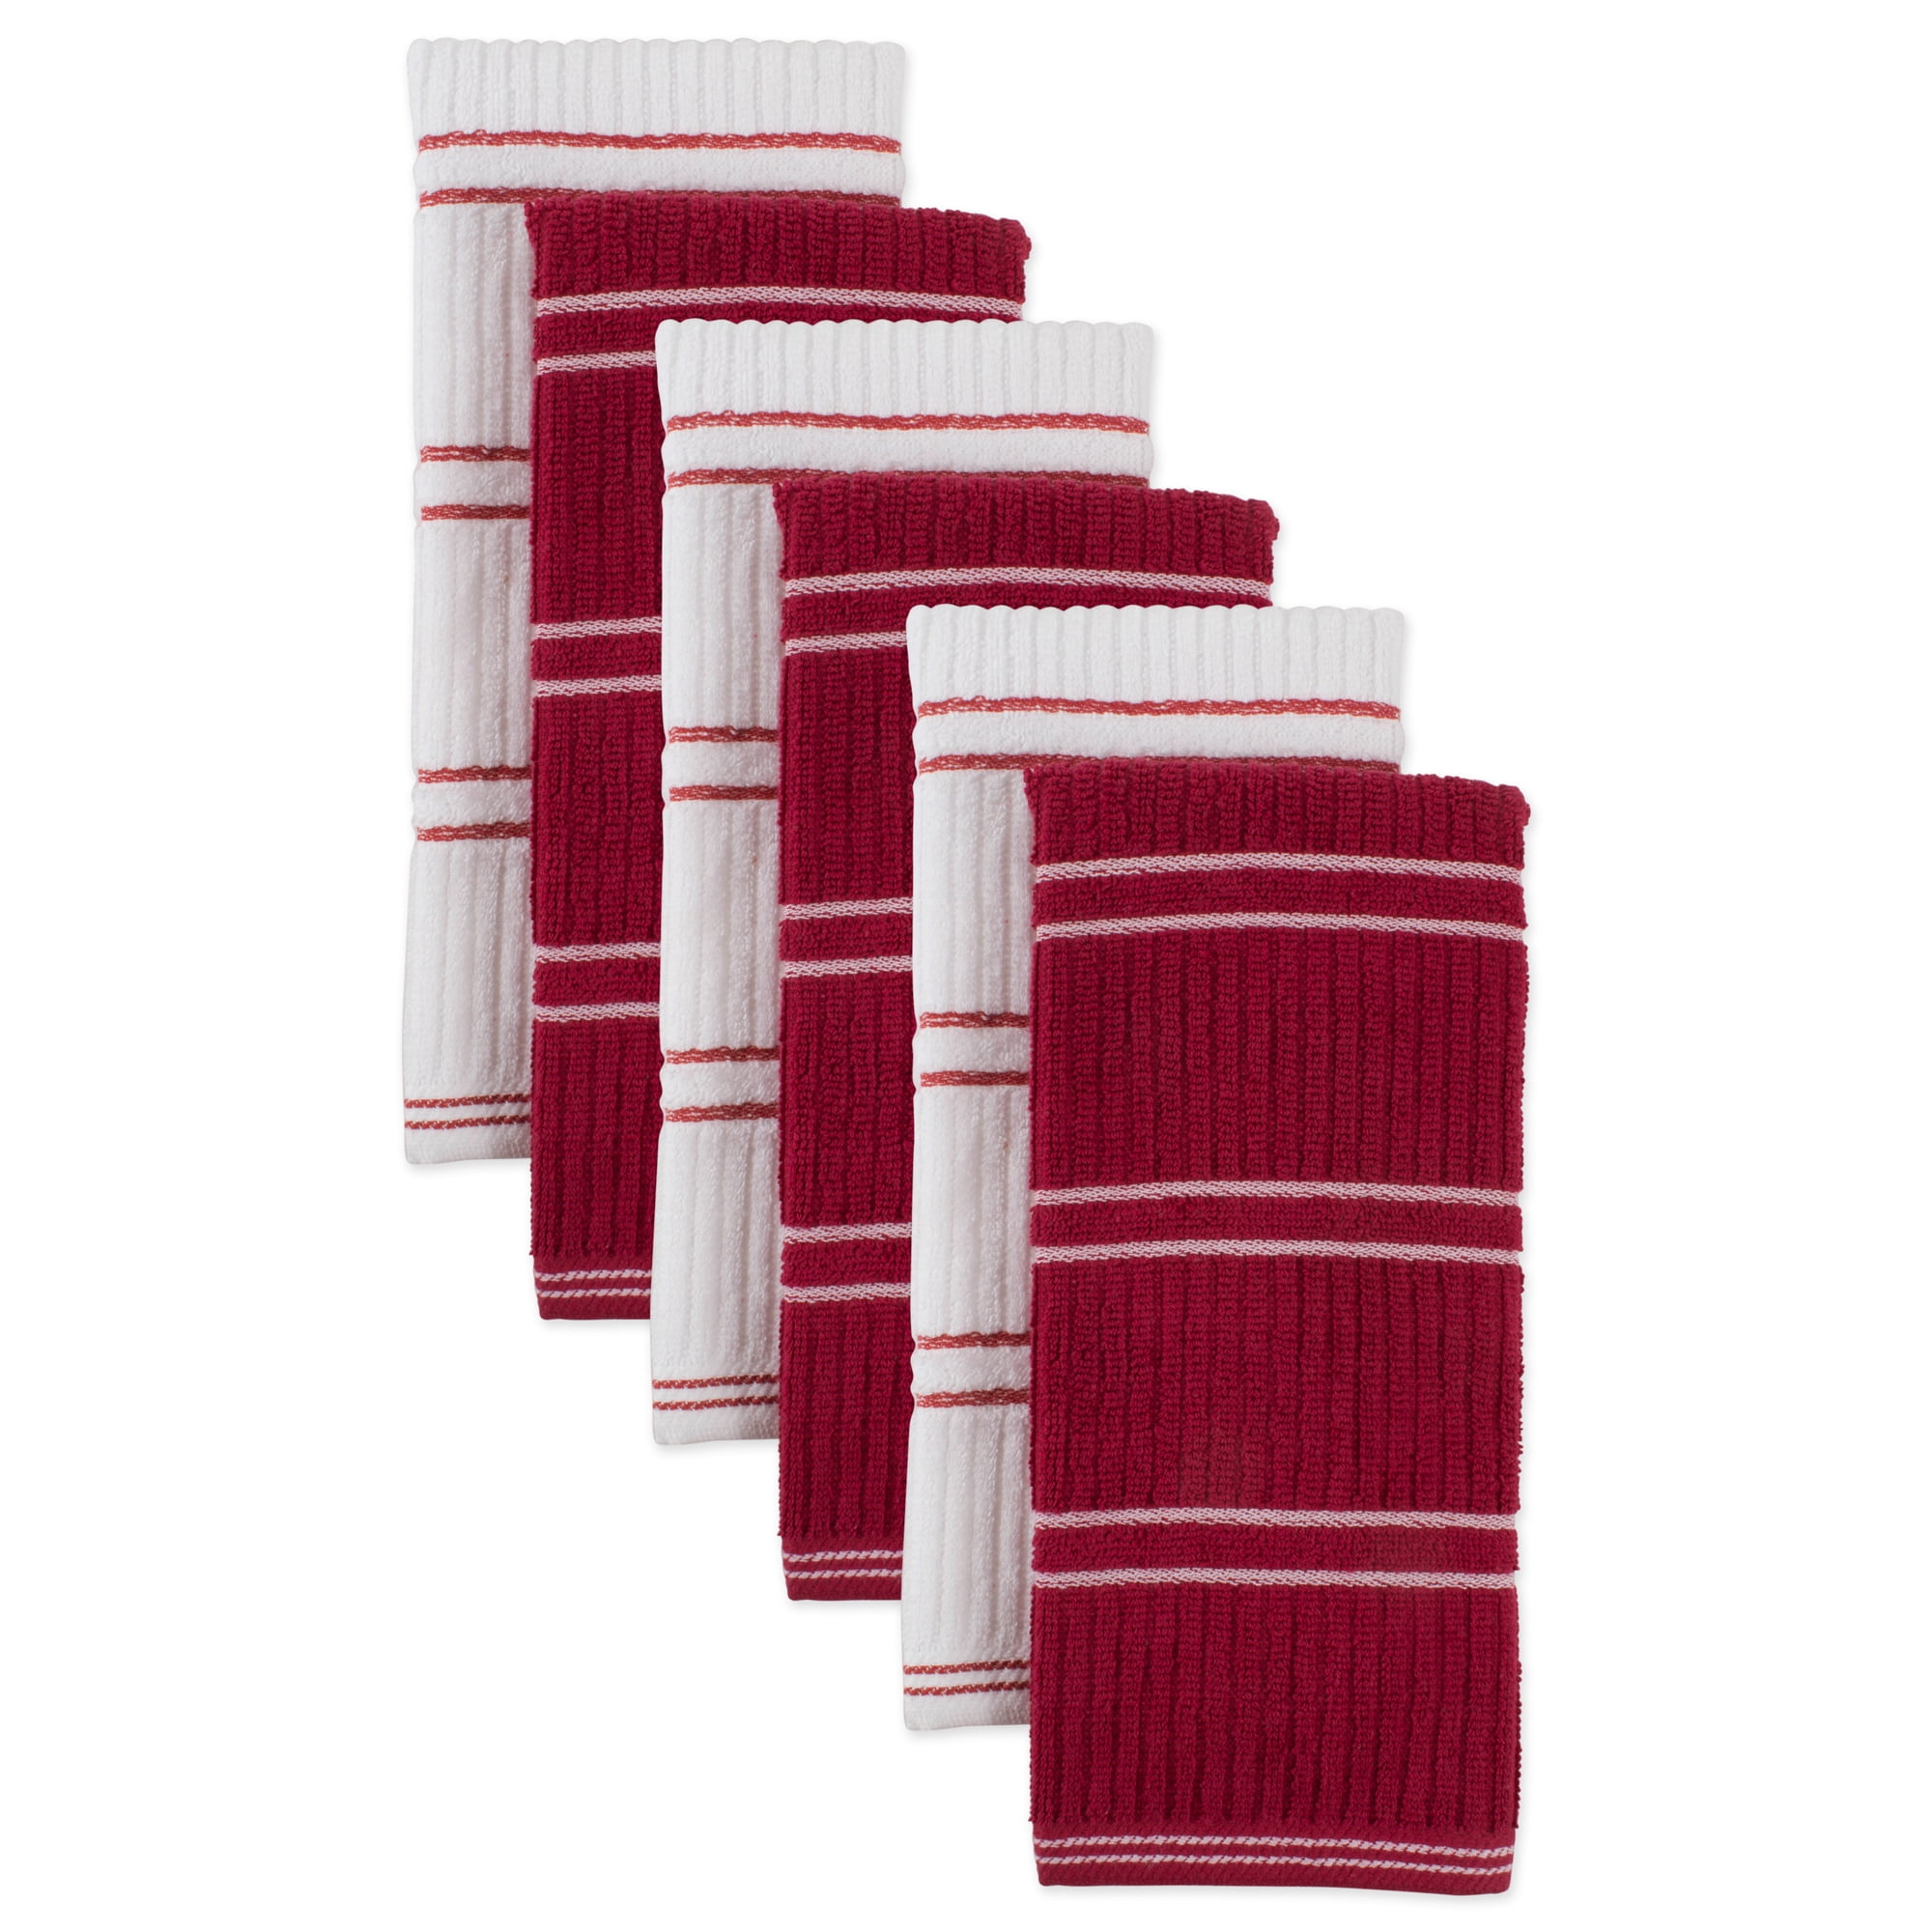 Design Imports 70202a Red Ribbed Terry Dishtowel Set - Set Of 6